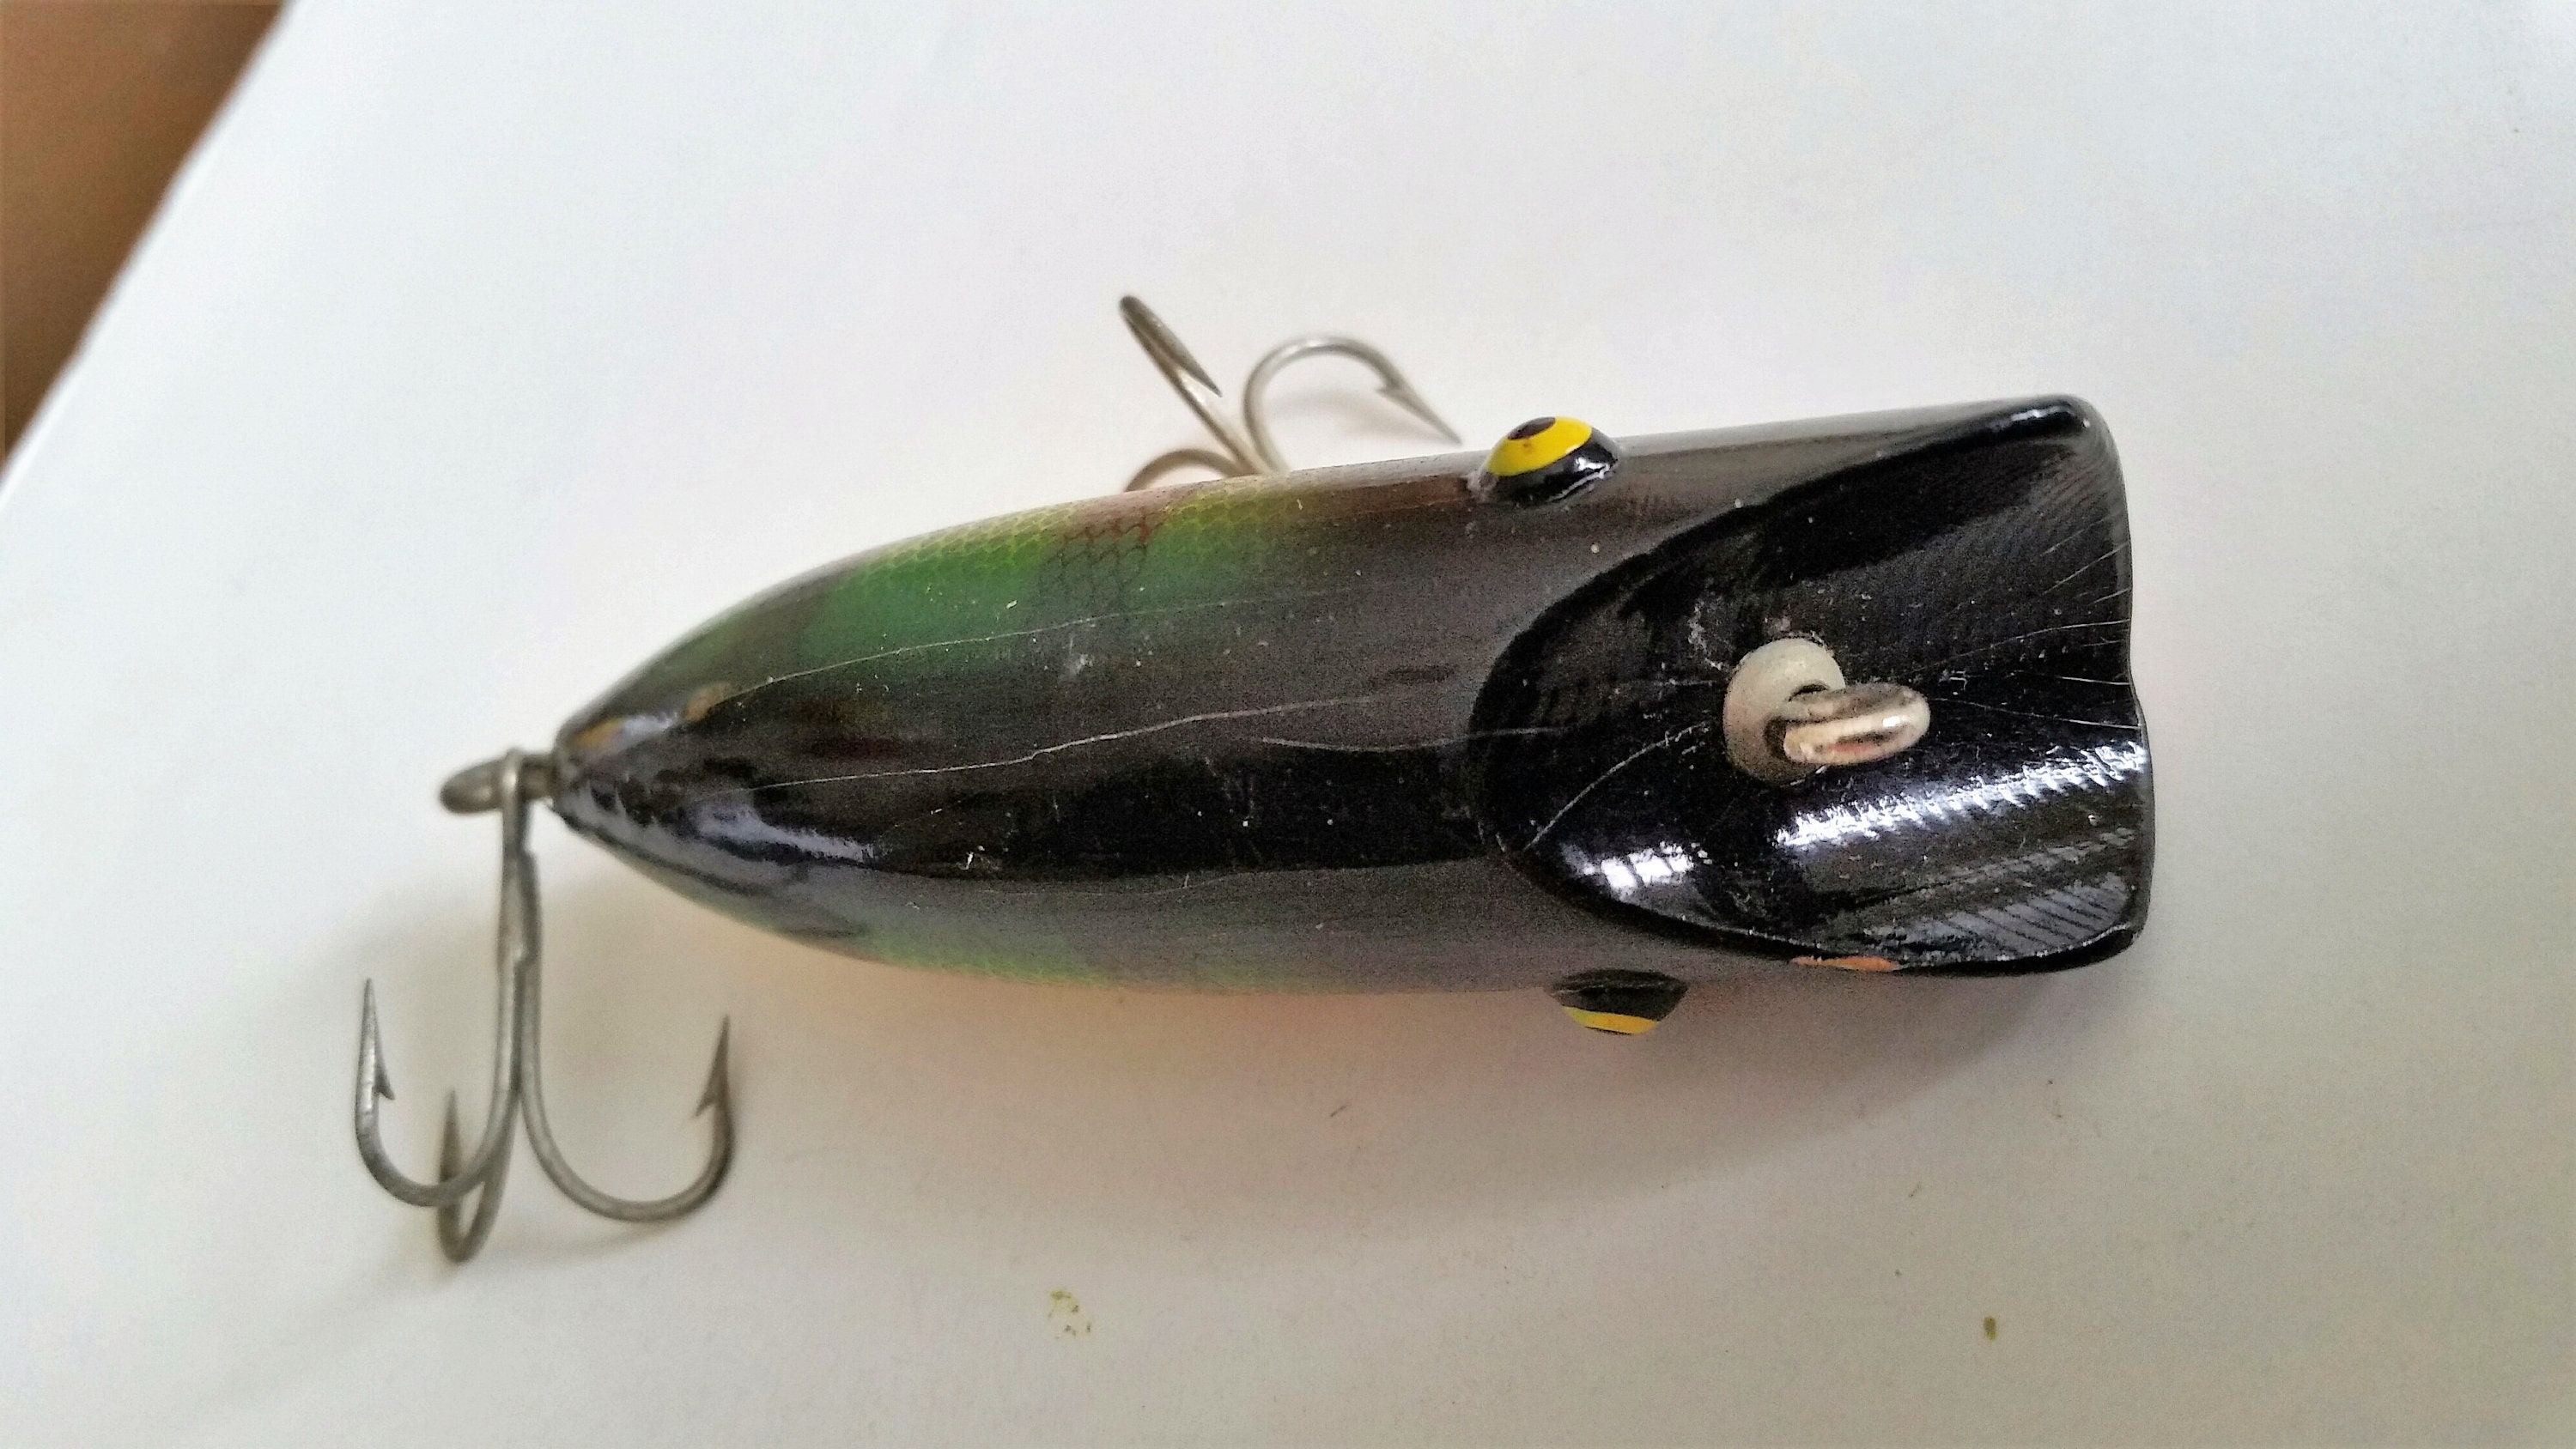 Vintage Fishing Lure: Unmarked Wooden South Bend Babe Oreno With Tack Eyes  & Original Hardware Rare Perch Color Circa 1950s 3 1/2 Oz. 